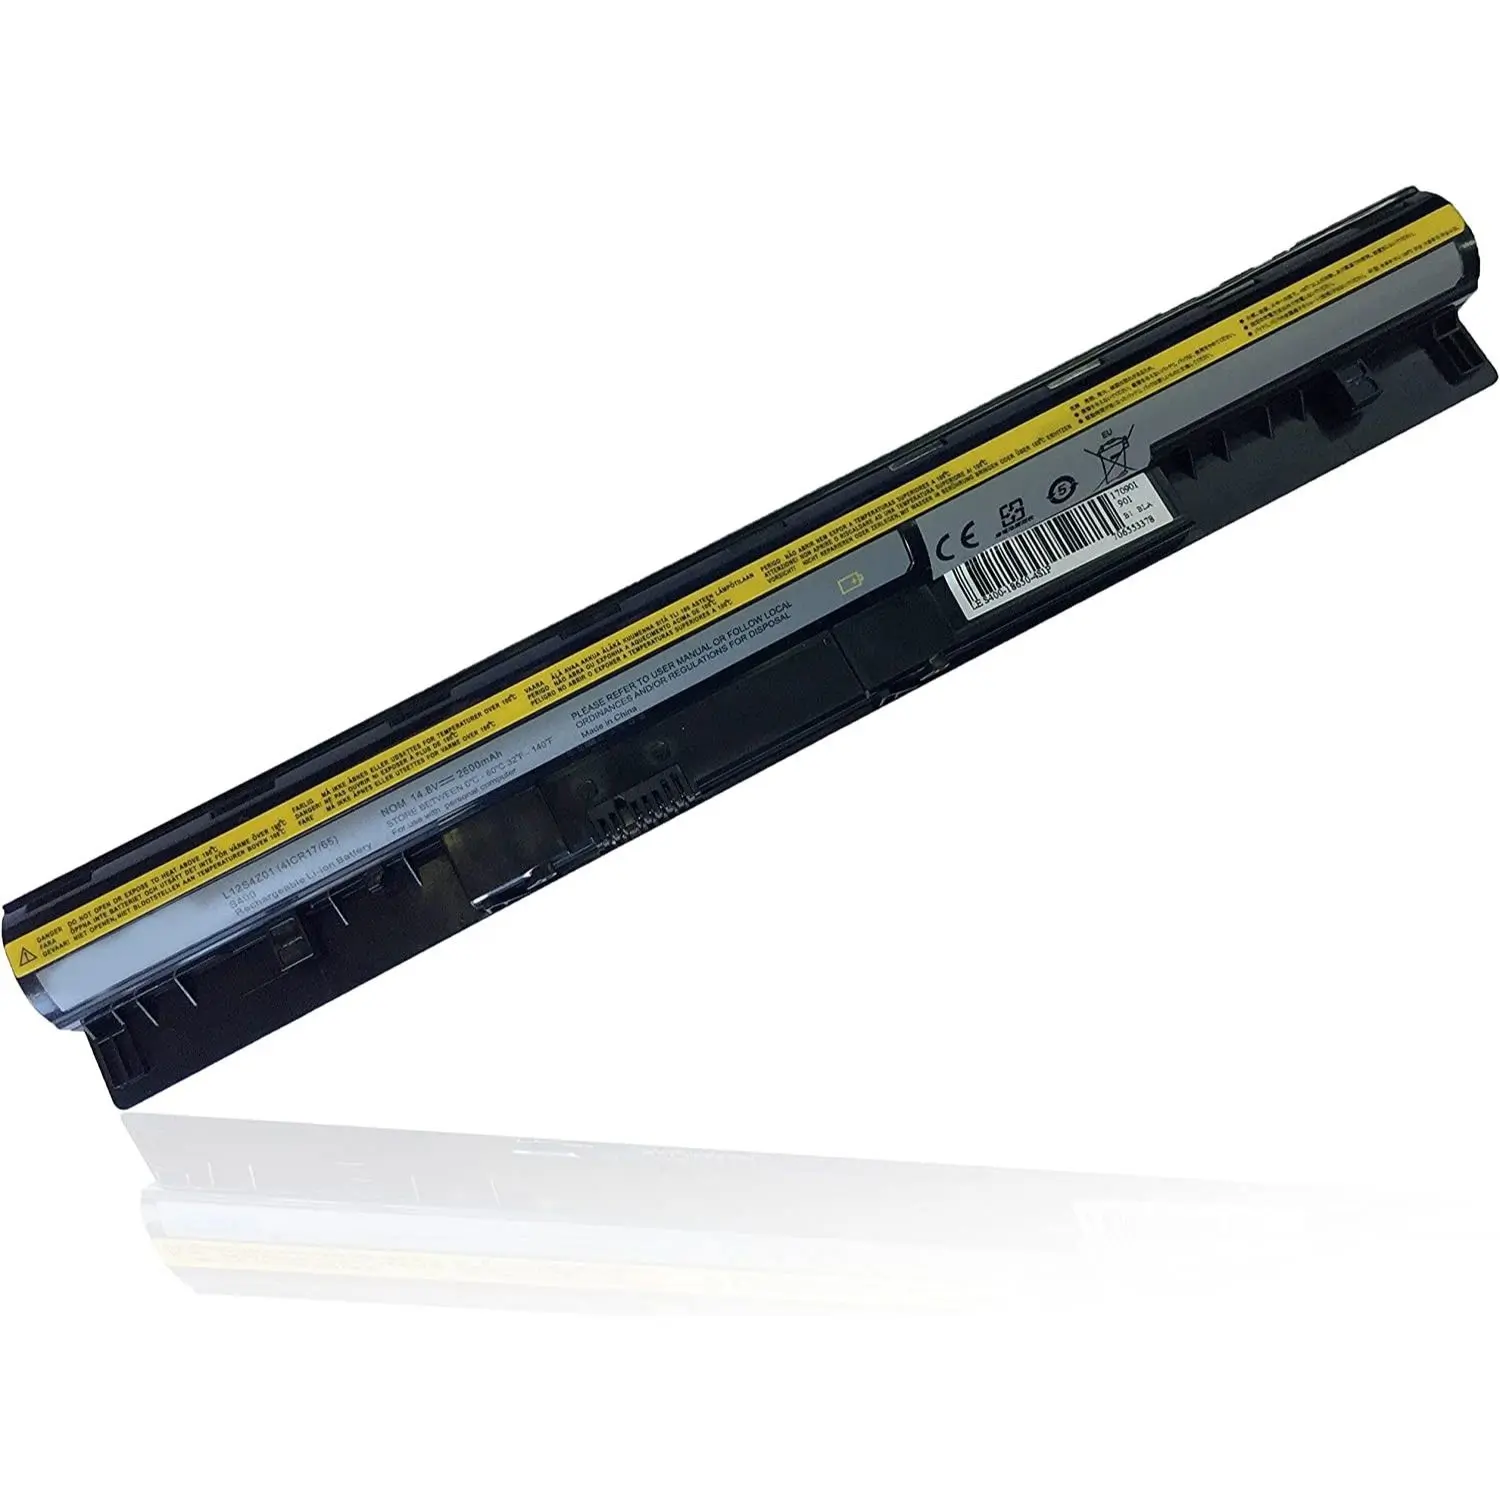 Replacement battery S400 for Lenovo Ideapad series Batteries 3